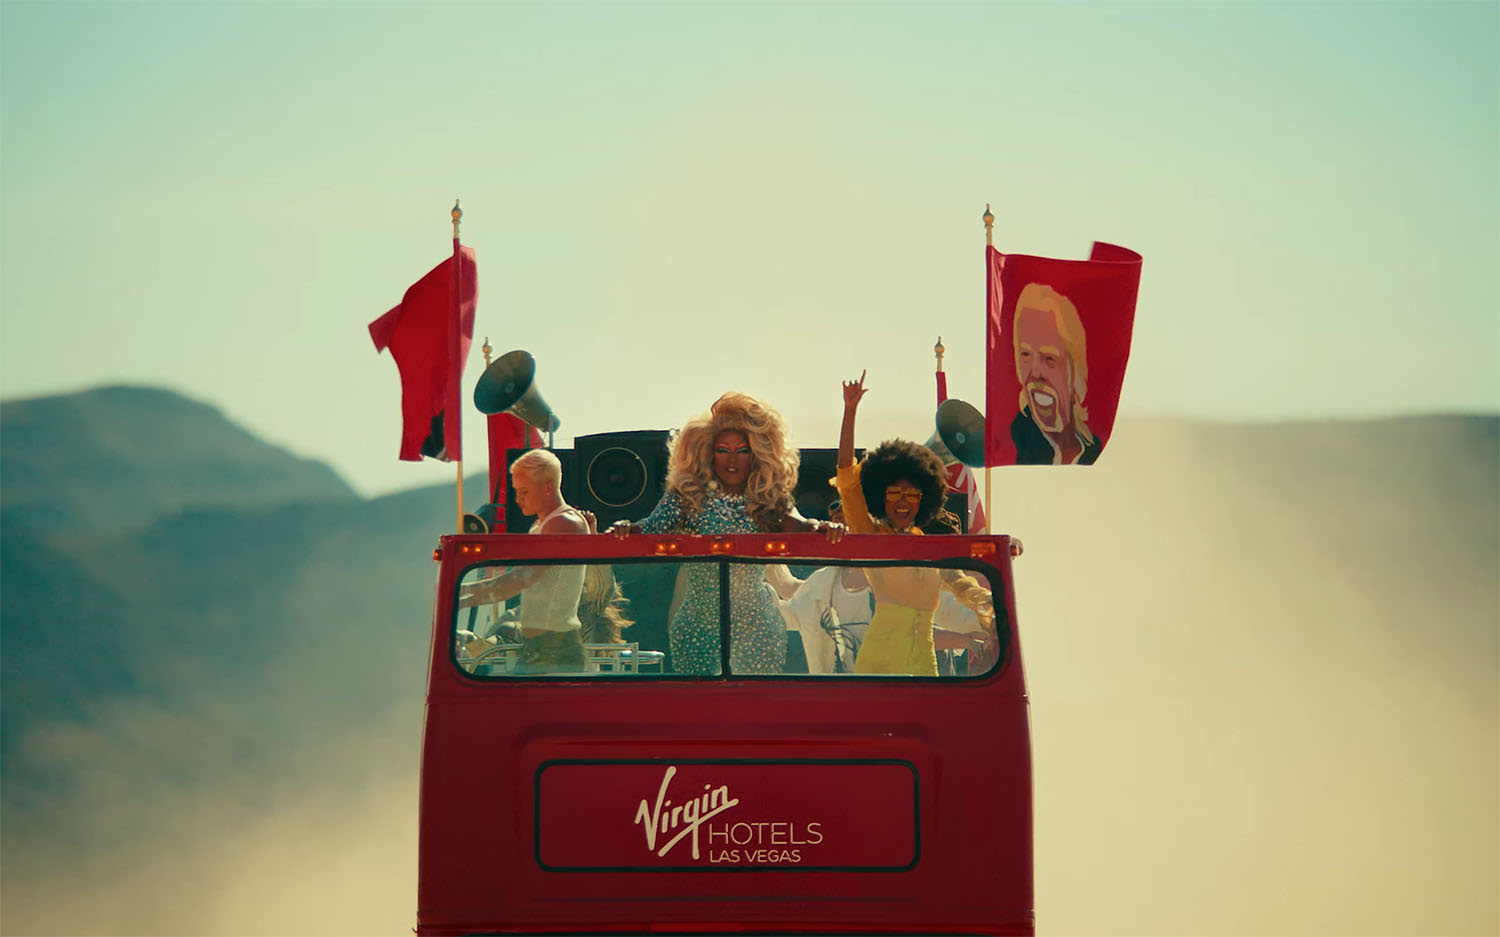 An open top red bus driving through the Las Vegas desert with people partying on the top deck and flags with Richard Branson's face on. The destination on the bus reads: Virgin Hotels Las Vegas